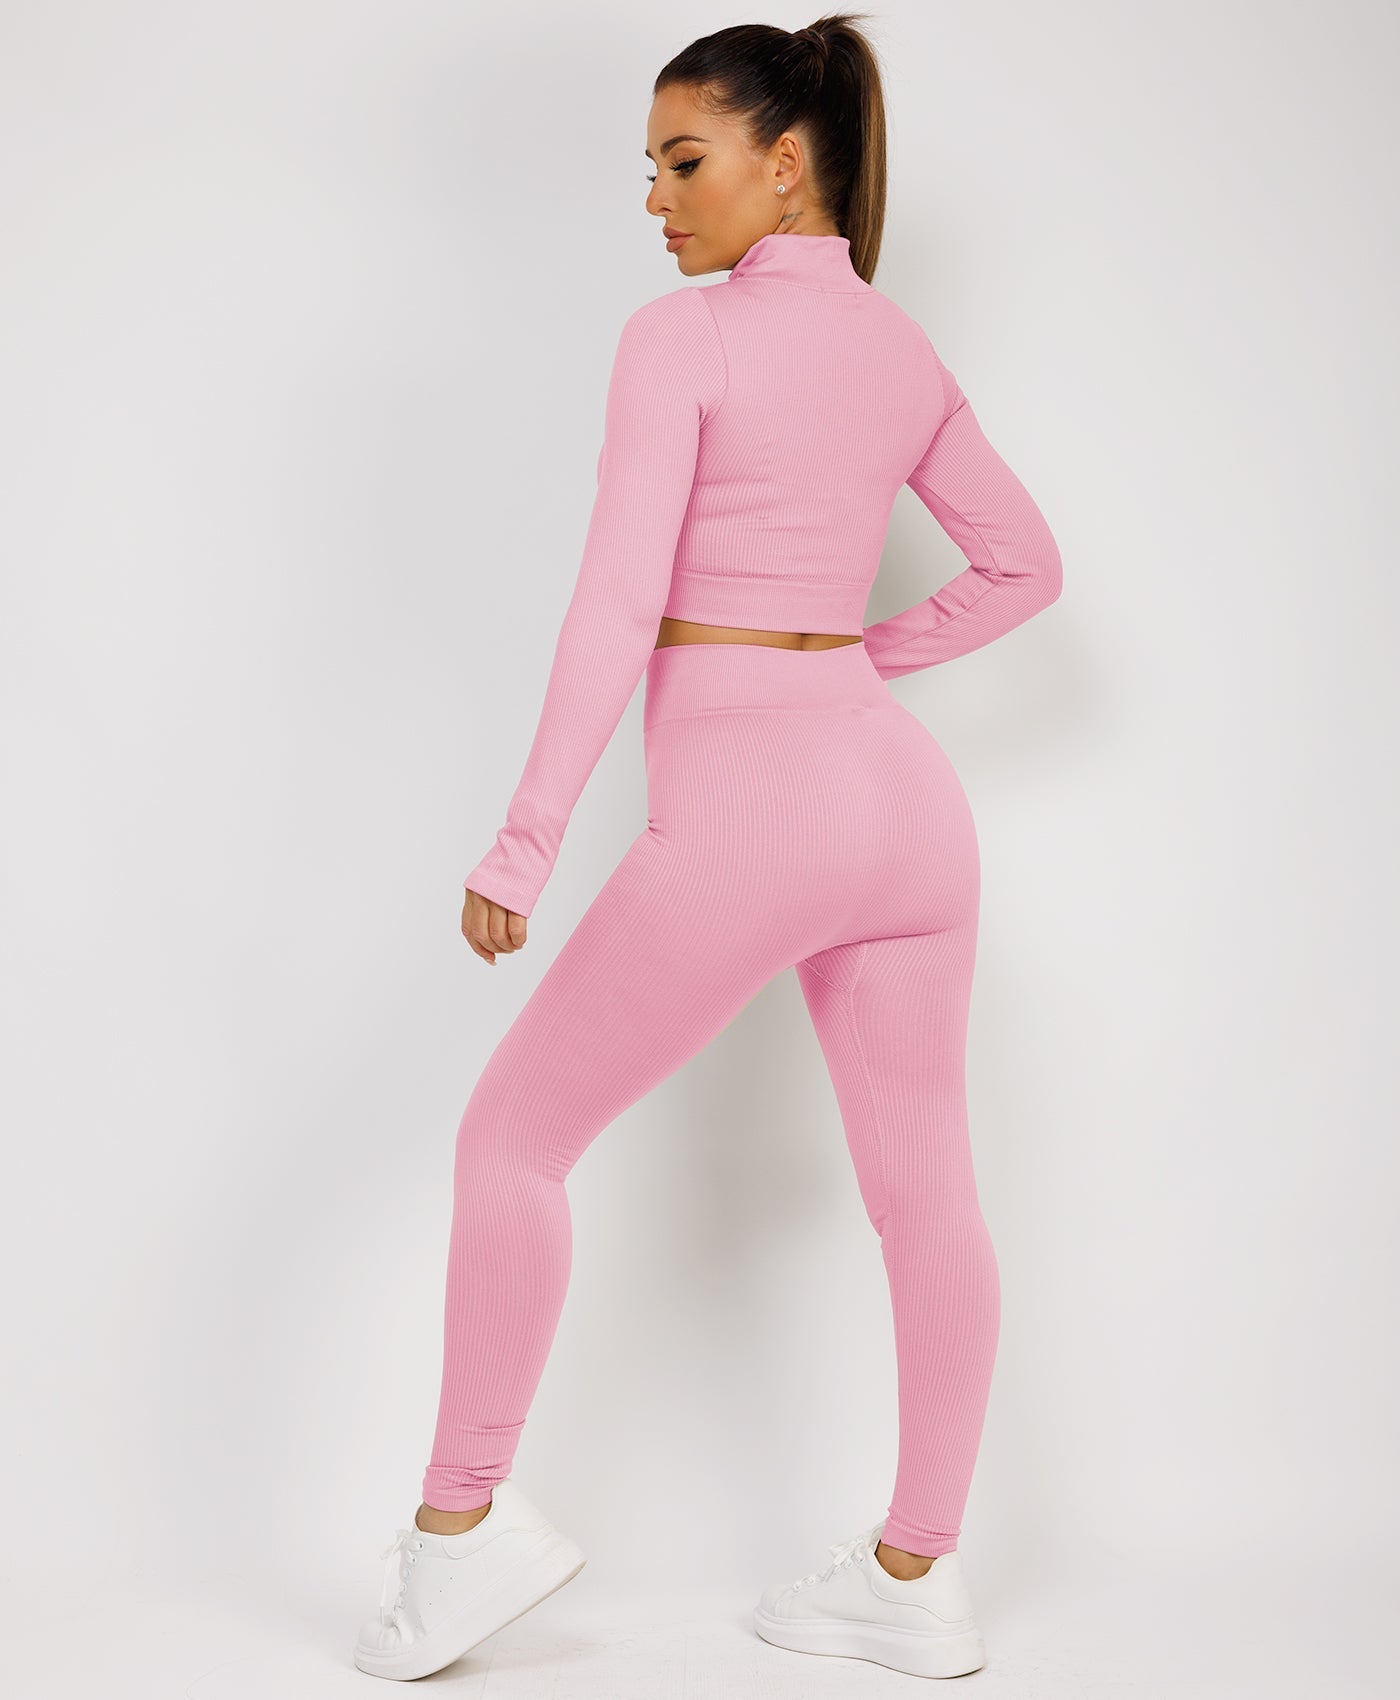 Baby Pink-Zipped-Neck-Ribbed-Activewear-9